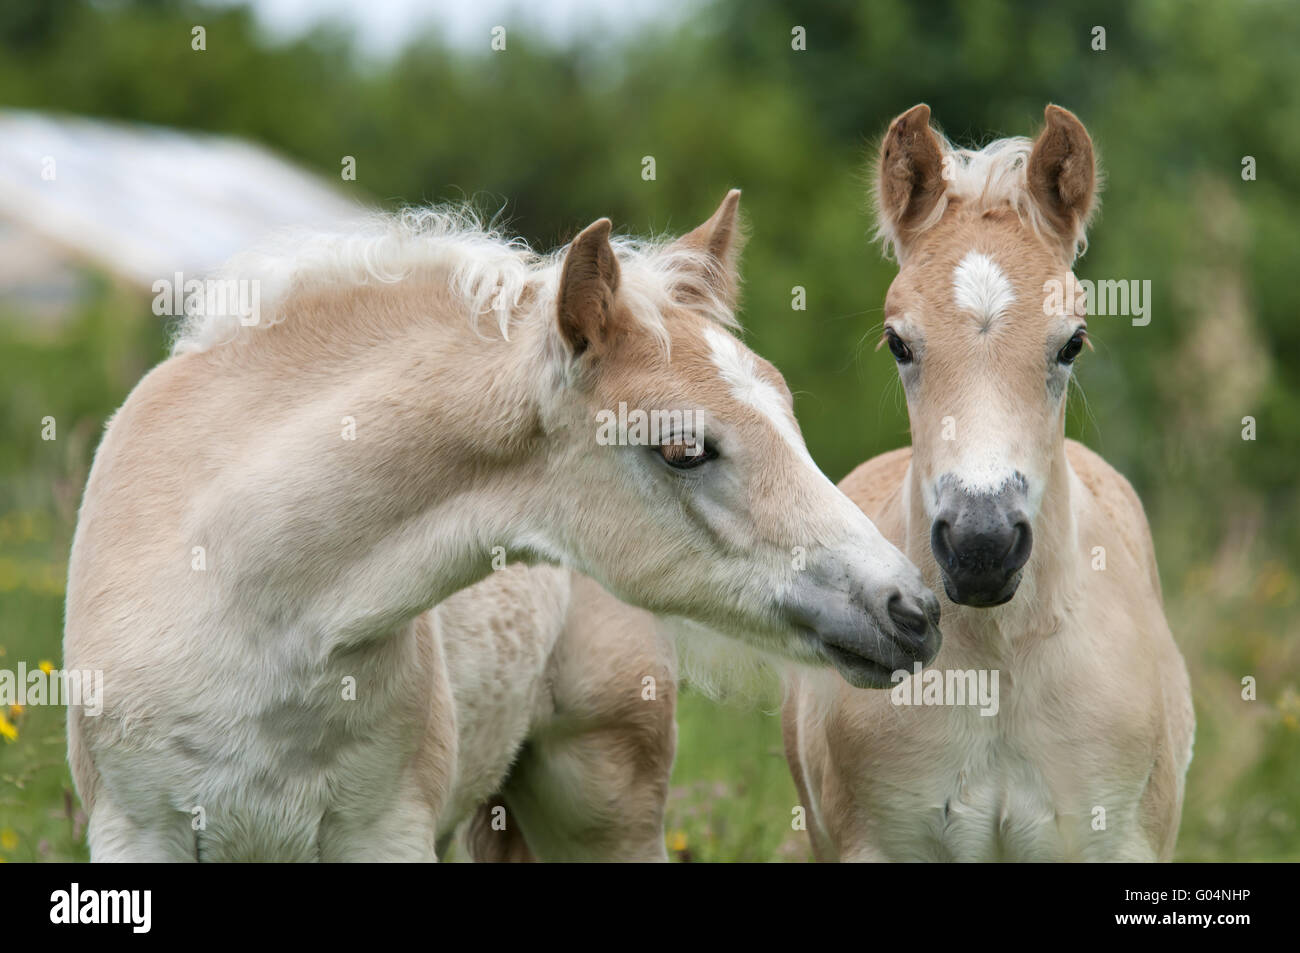 Two Haflinger horses, colts, side by side Stock Photo